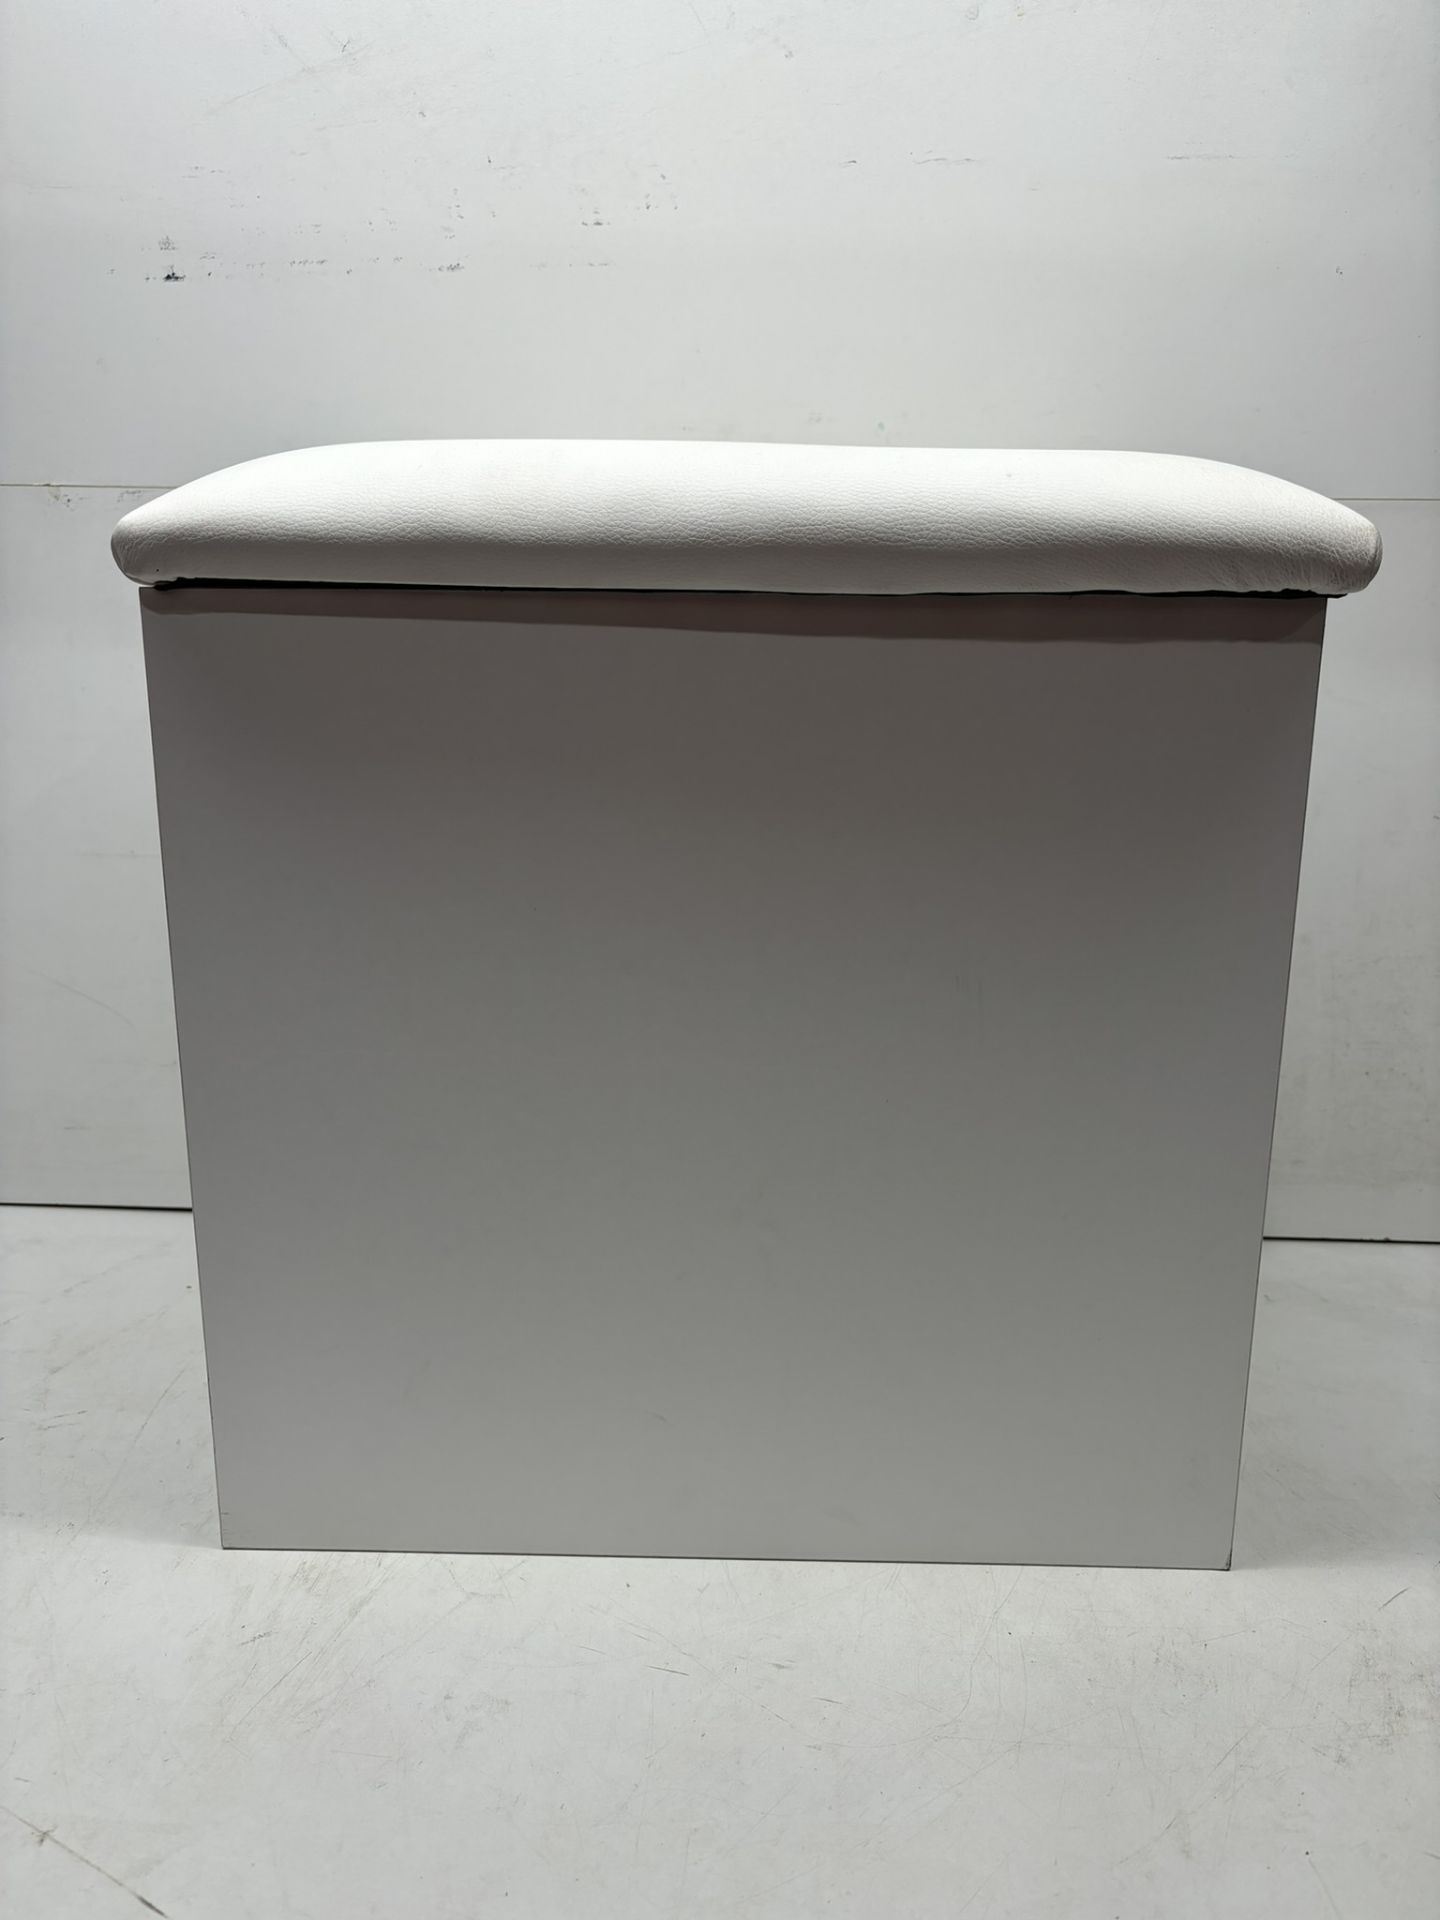 Ex-Display Small Wooden White Footstool With Cushioned Top - Image 4 of 4